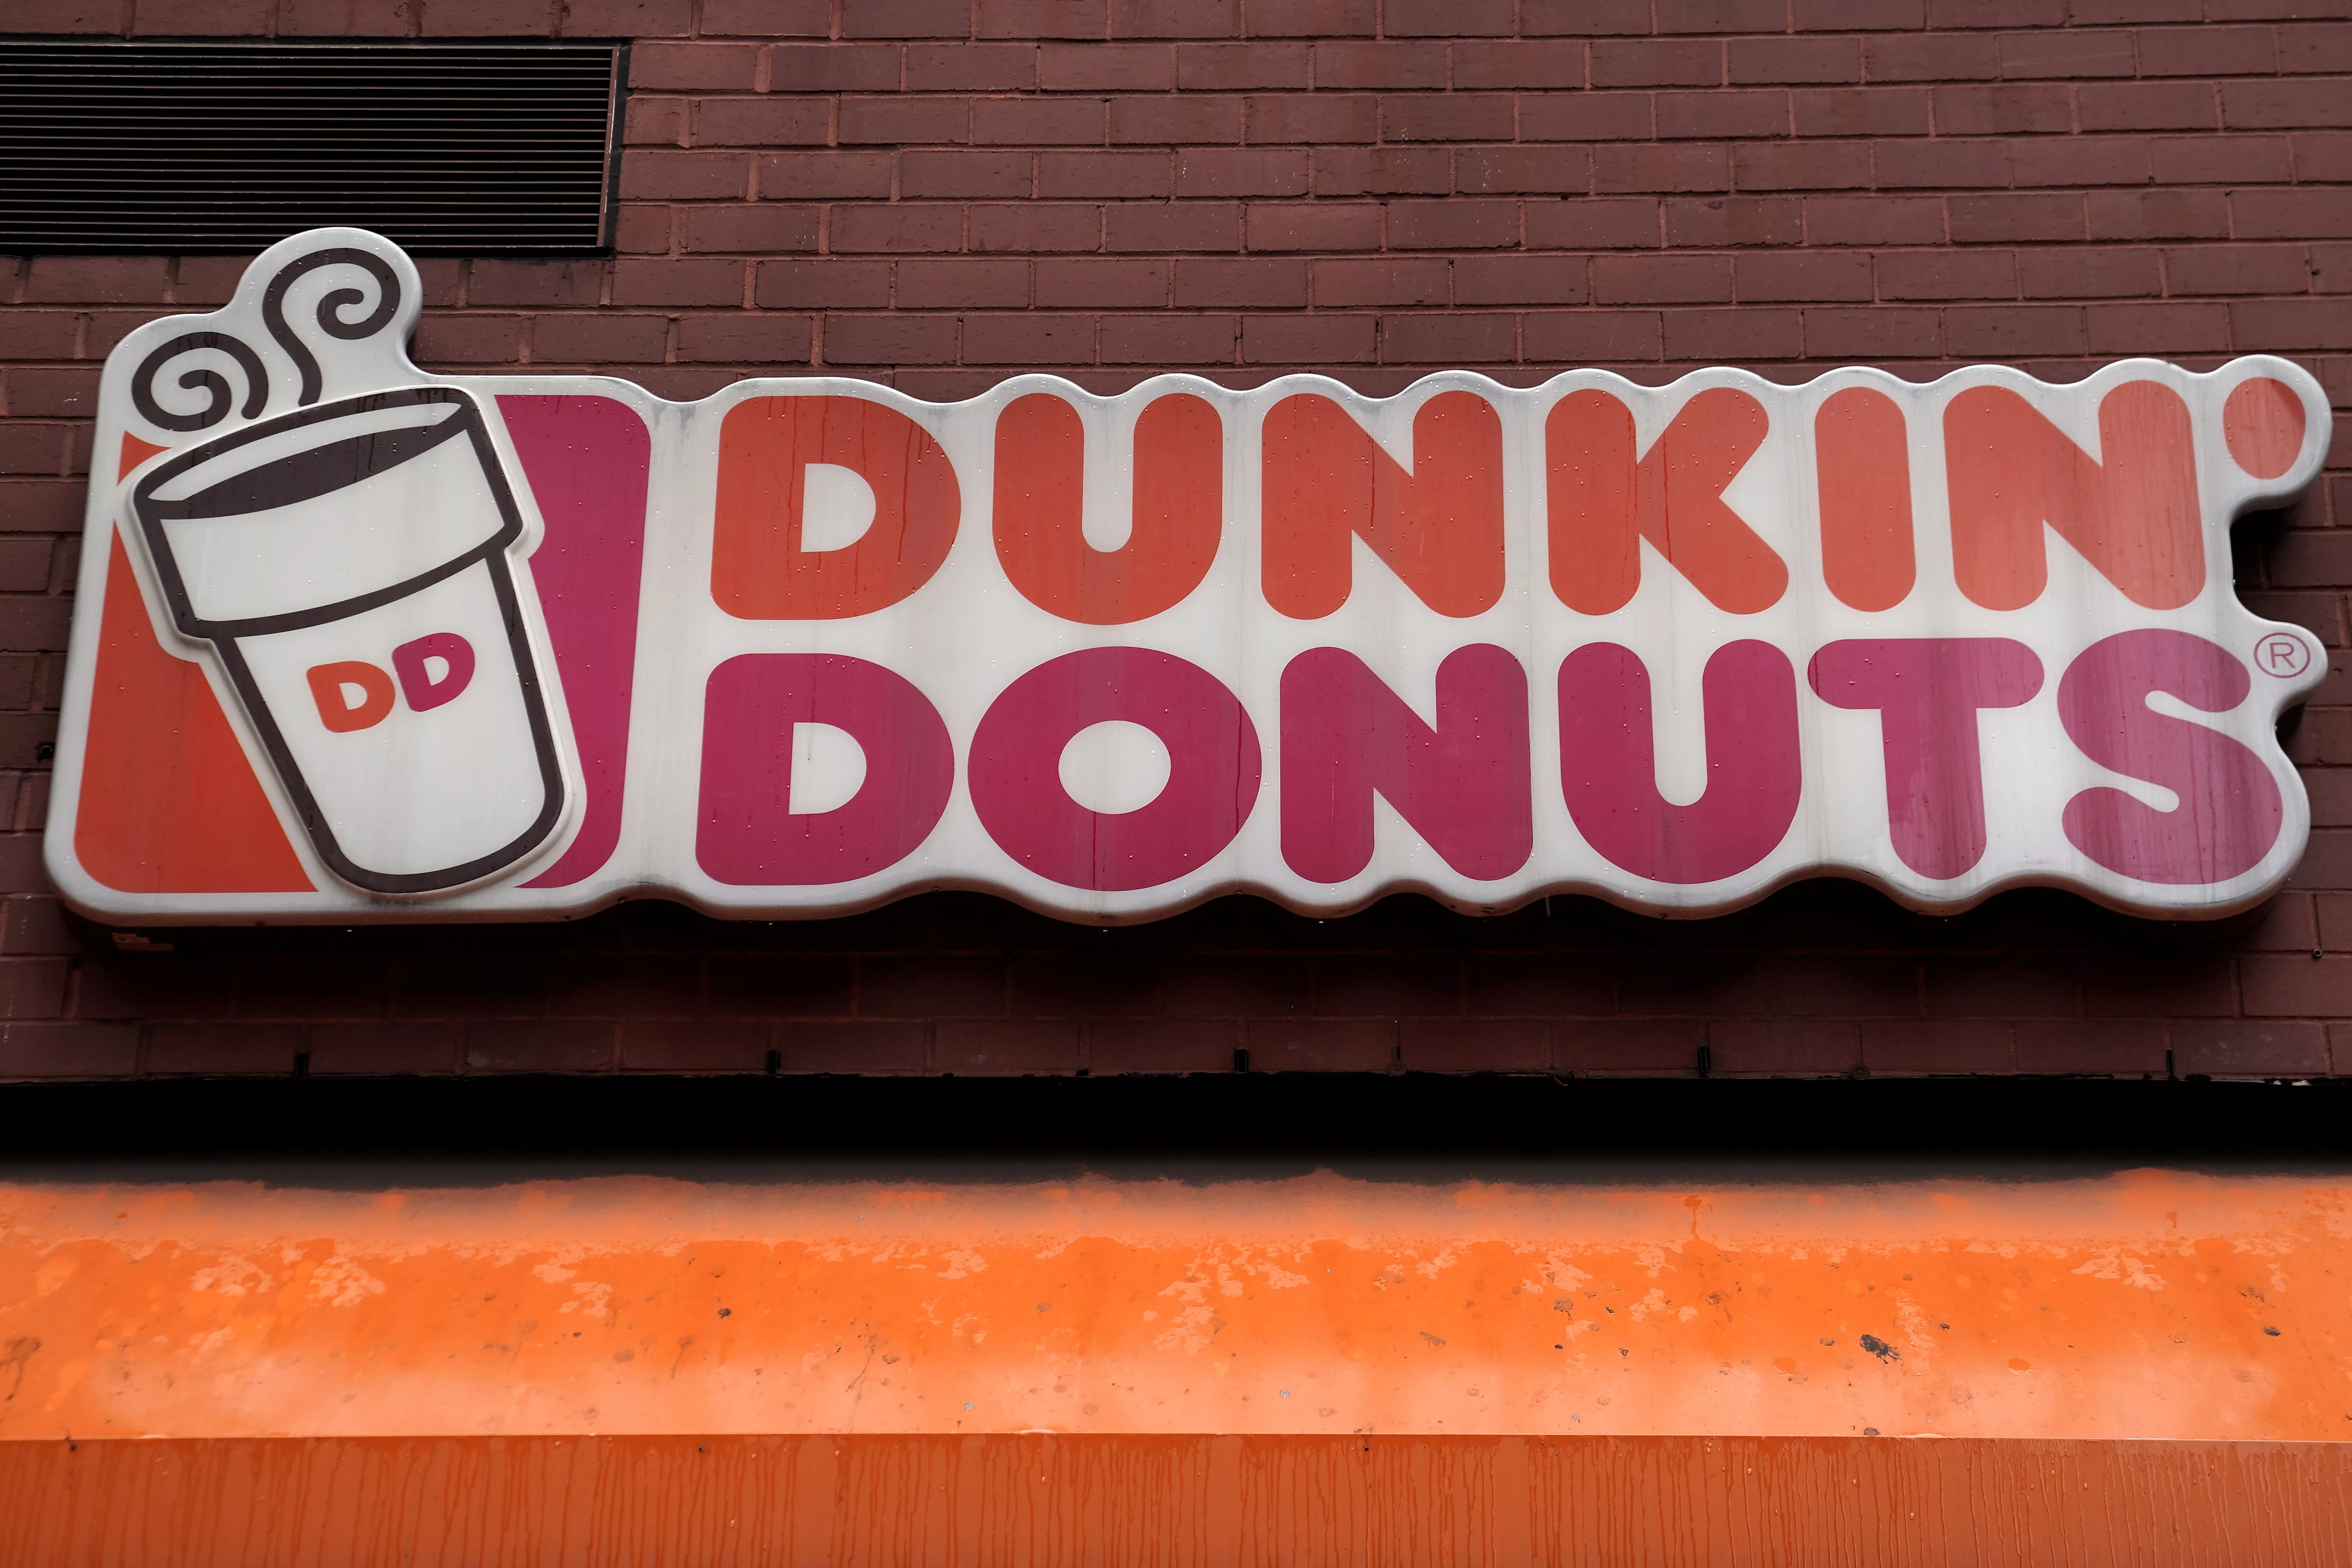 a-dunkin-donuts-logo-is-pictured-3